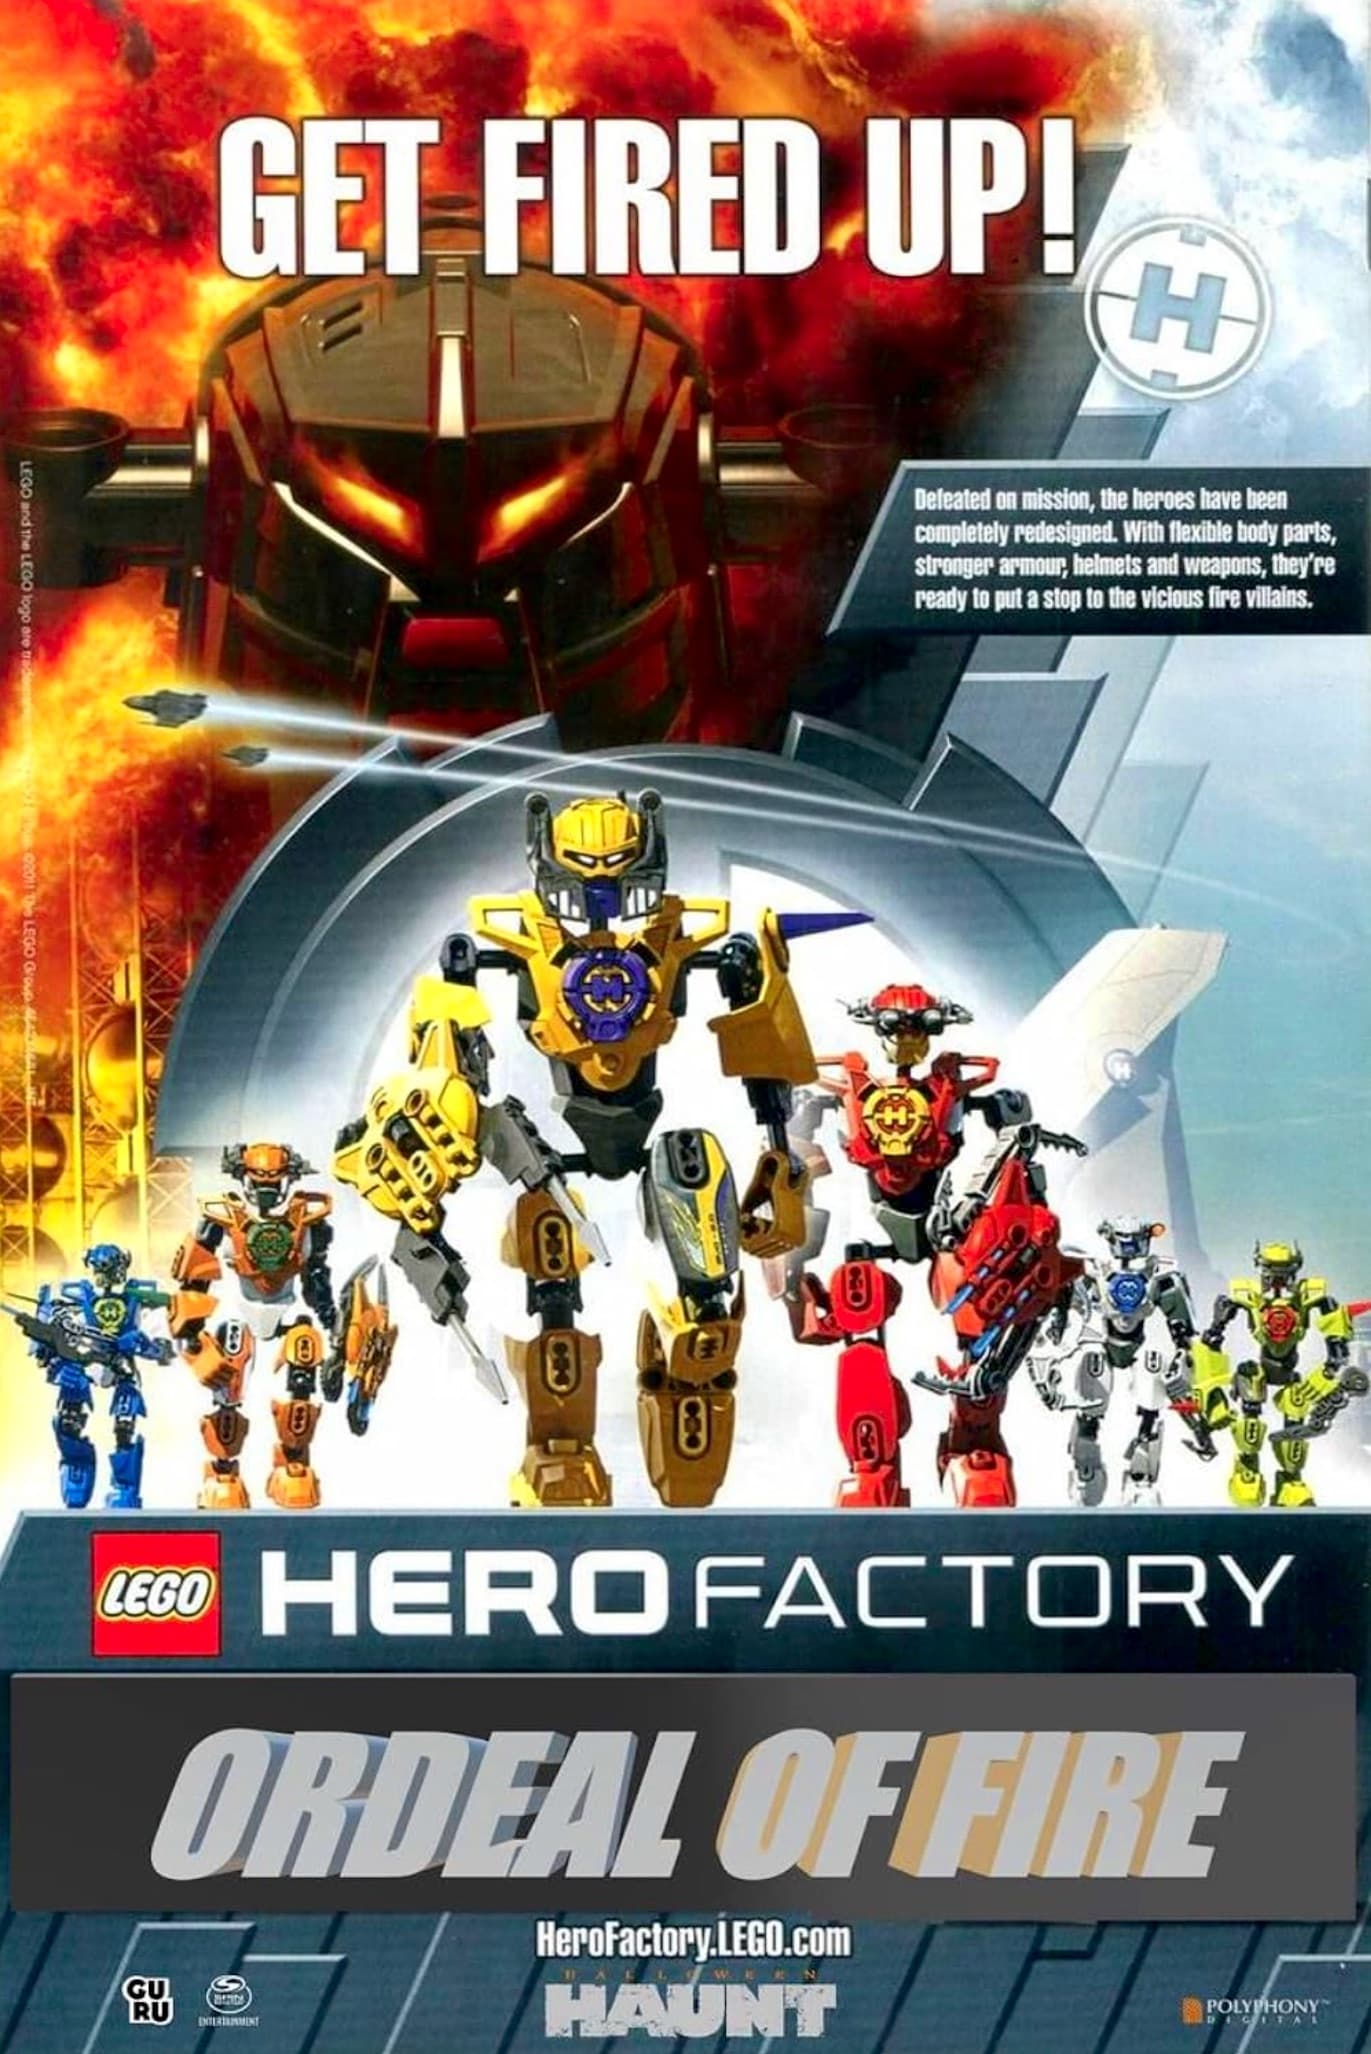 LEGO Hero Factory: Ordeal of Fire